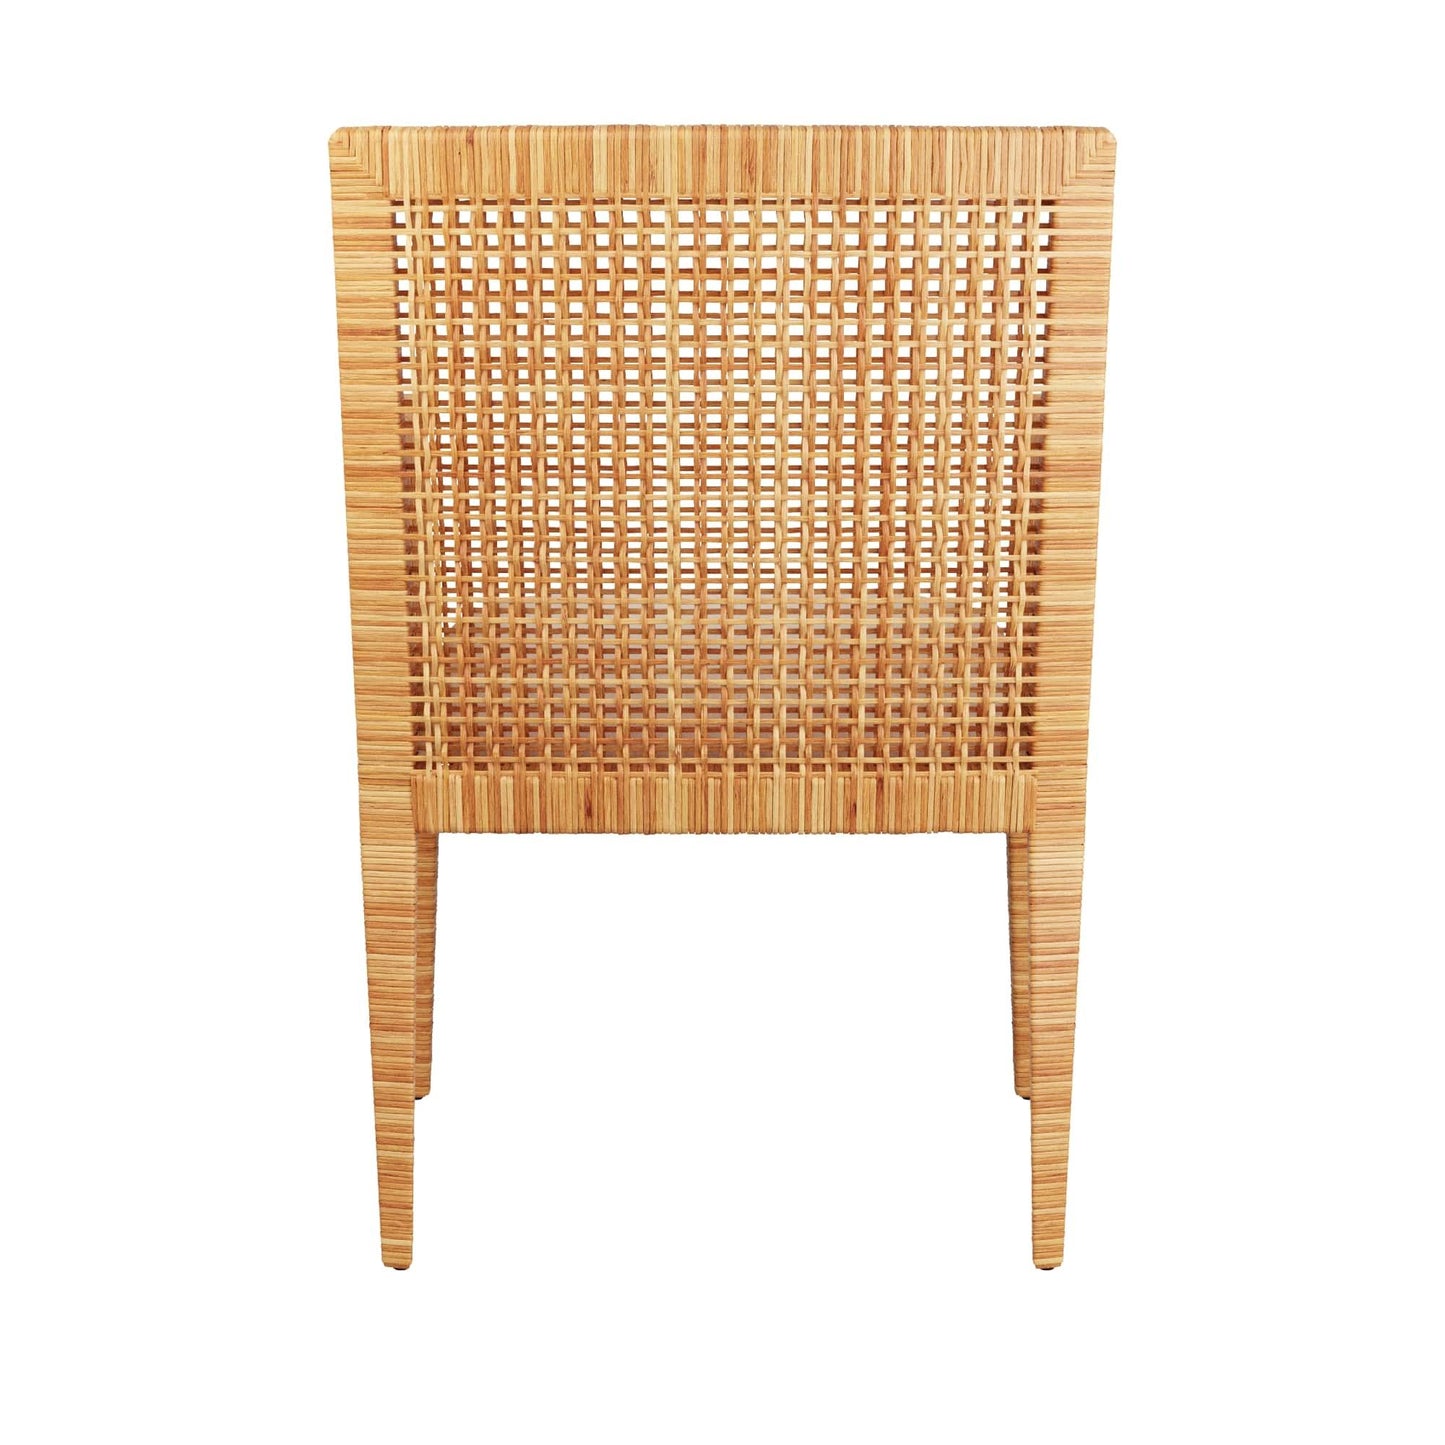 arteriors palmer dining chair back